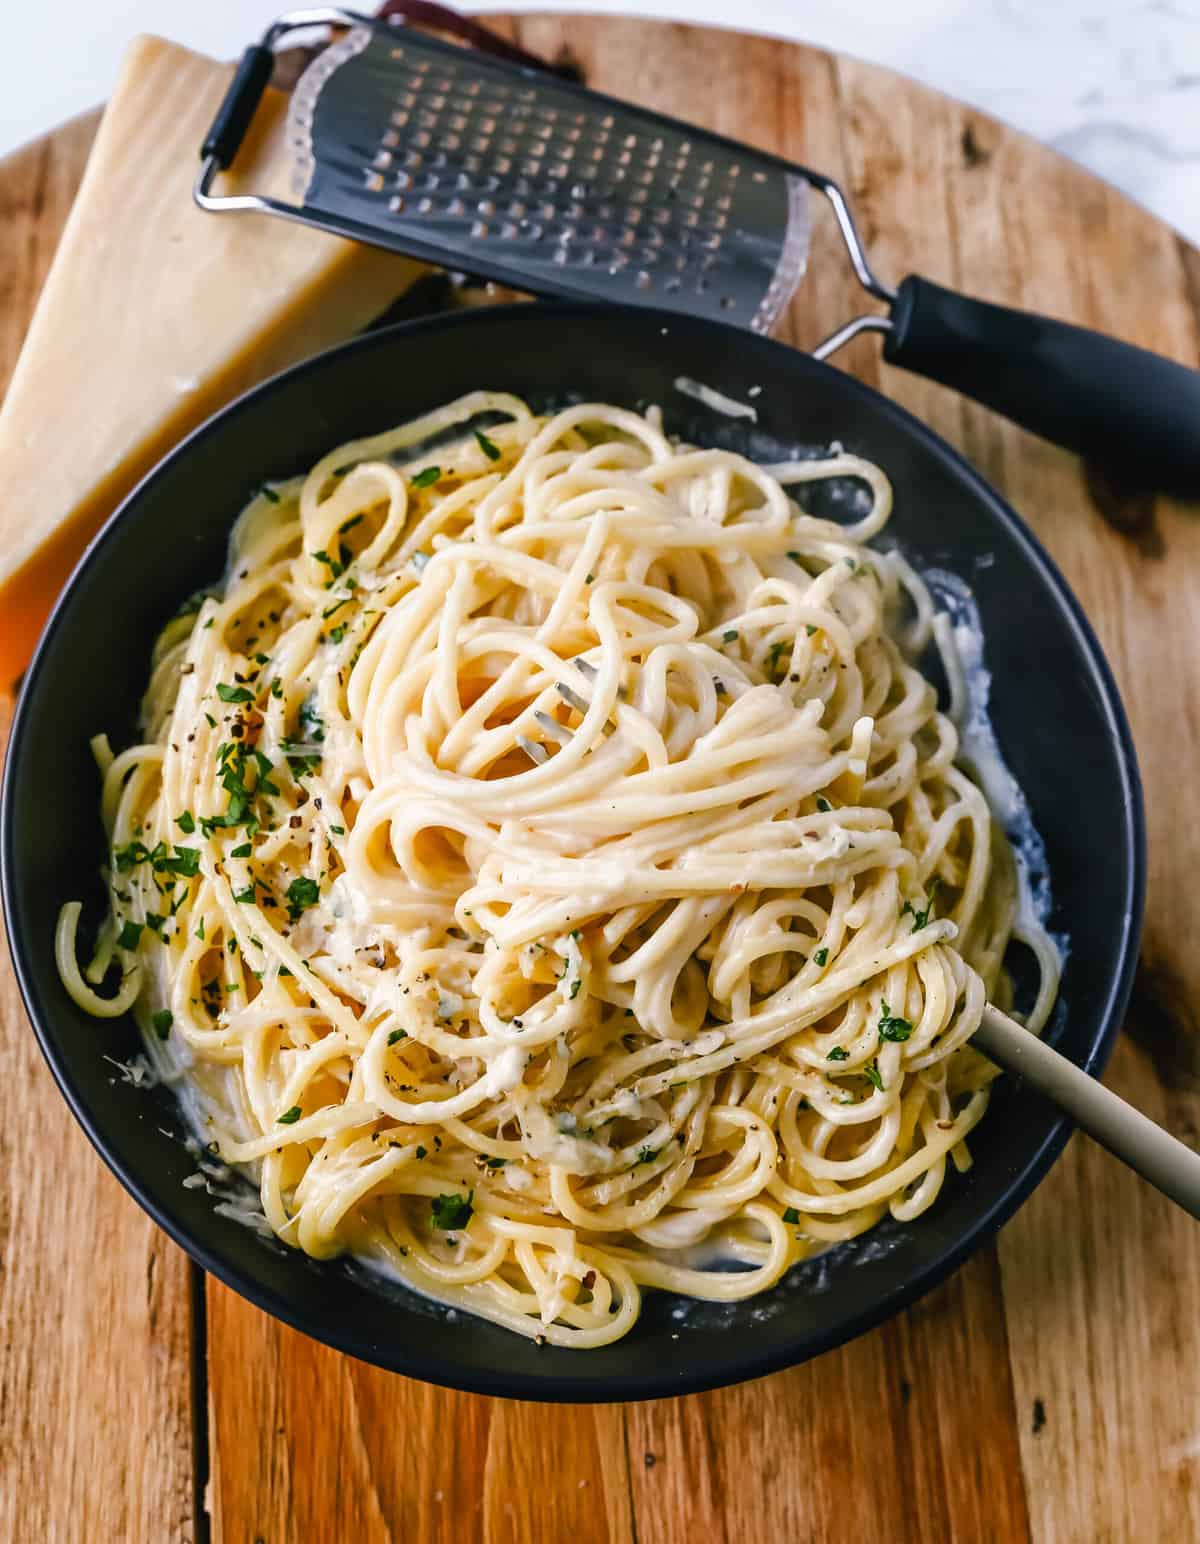 Break-Up Pasta is a creamy 3-cheese spaghetti recipe made with butter, garlic, cream, broth, Italian cheeses, spices and tossed into spaghetti.  This is the best creamy spaghetti recipe known to help cure a breakup!